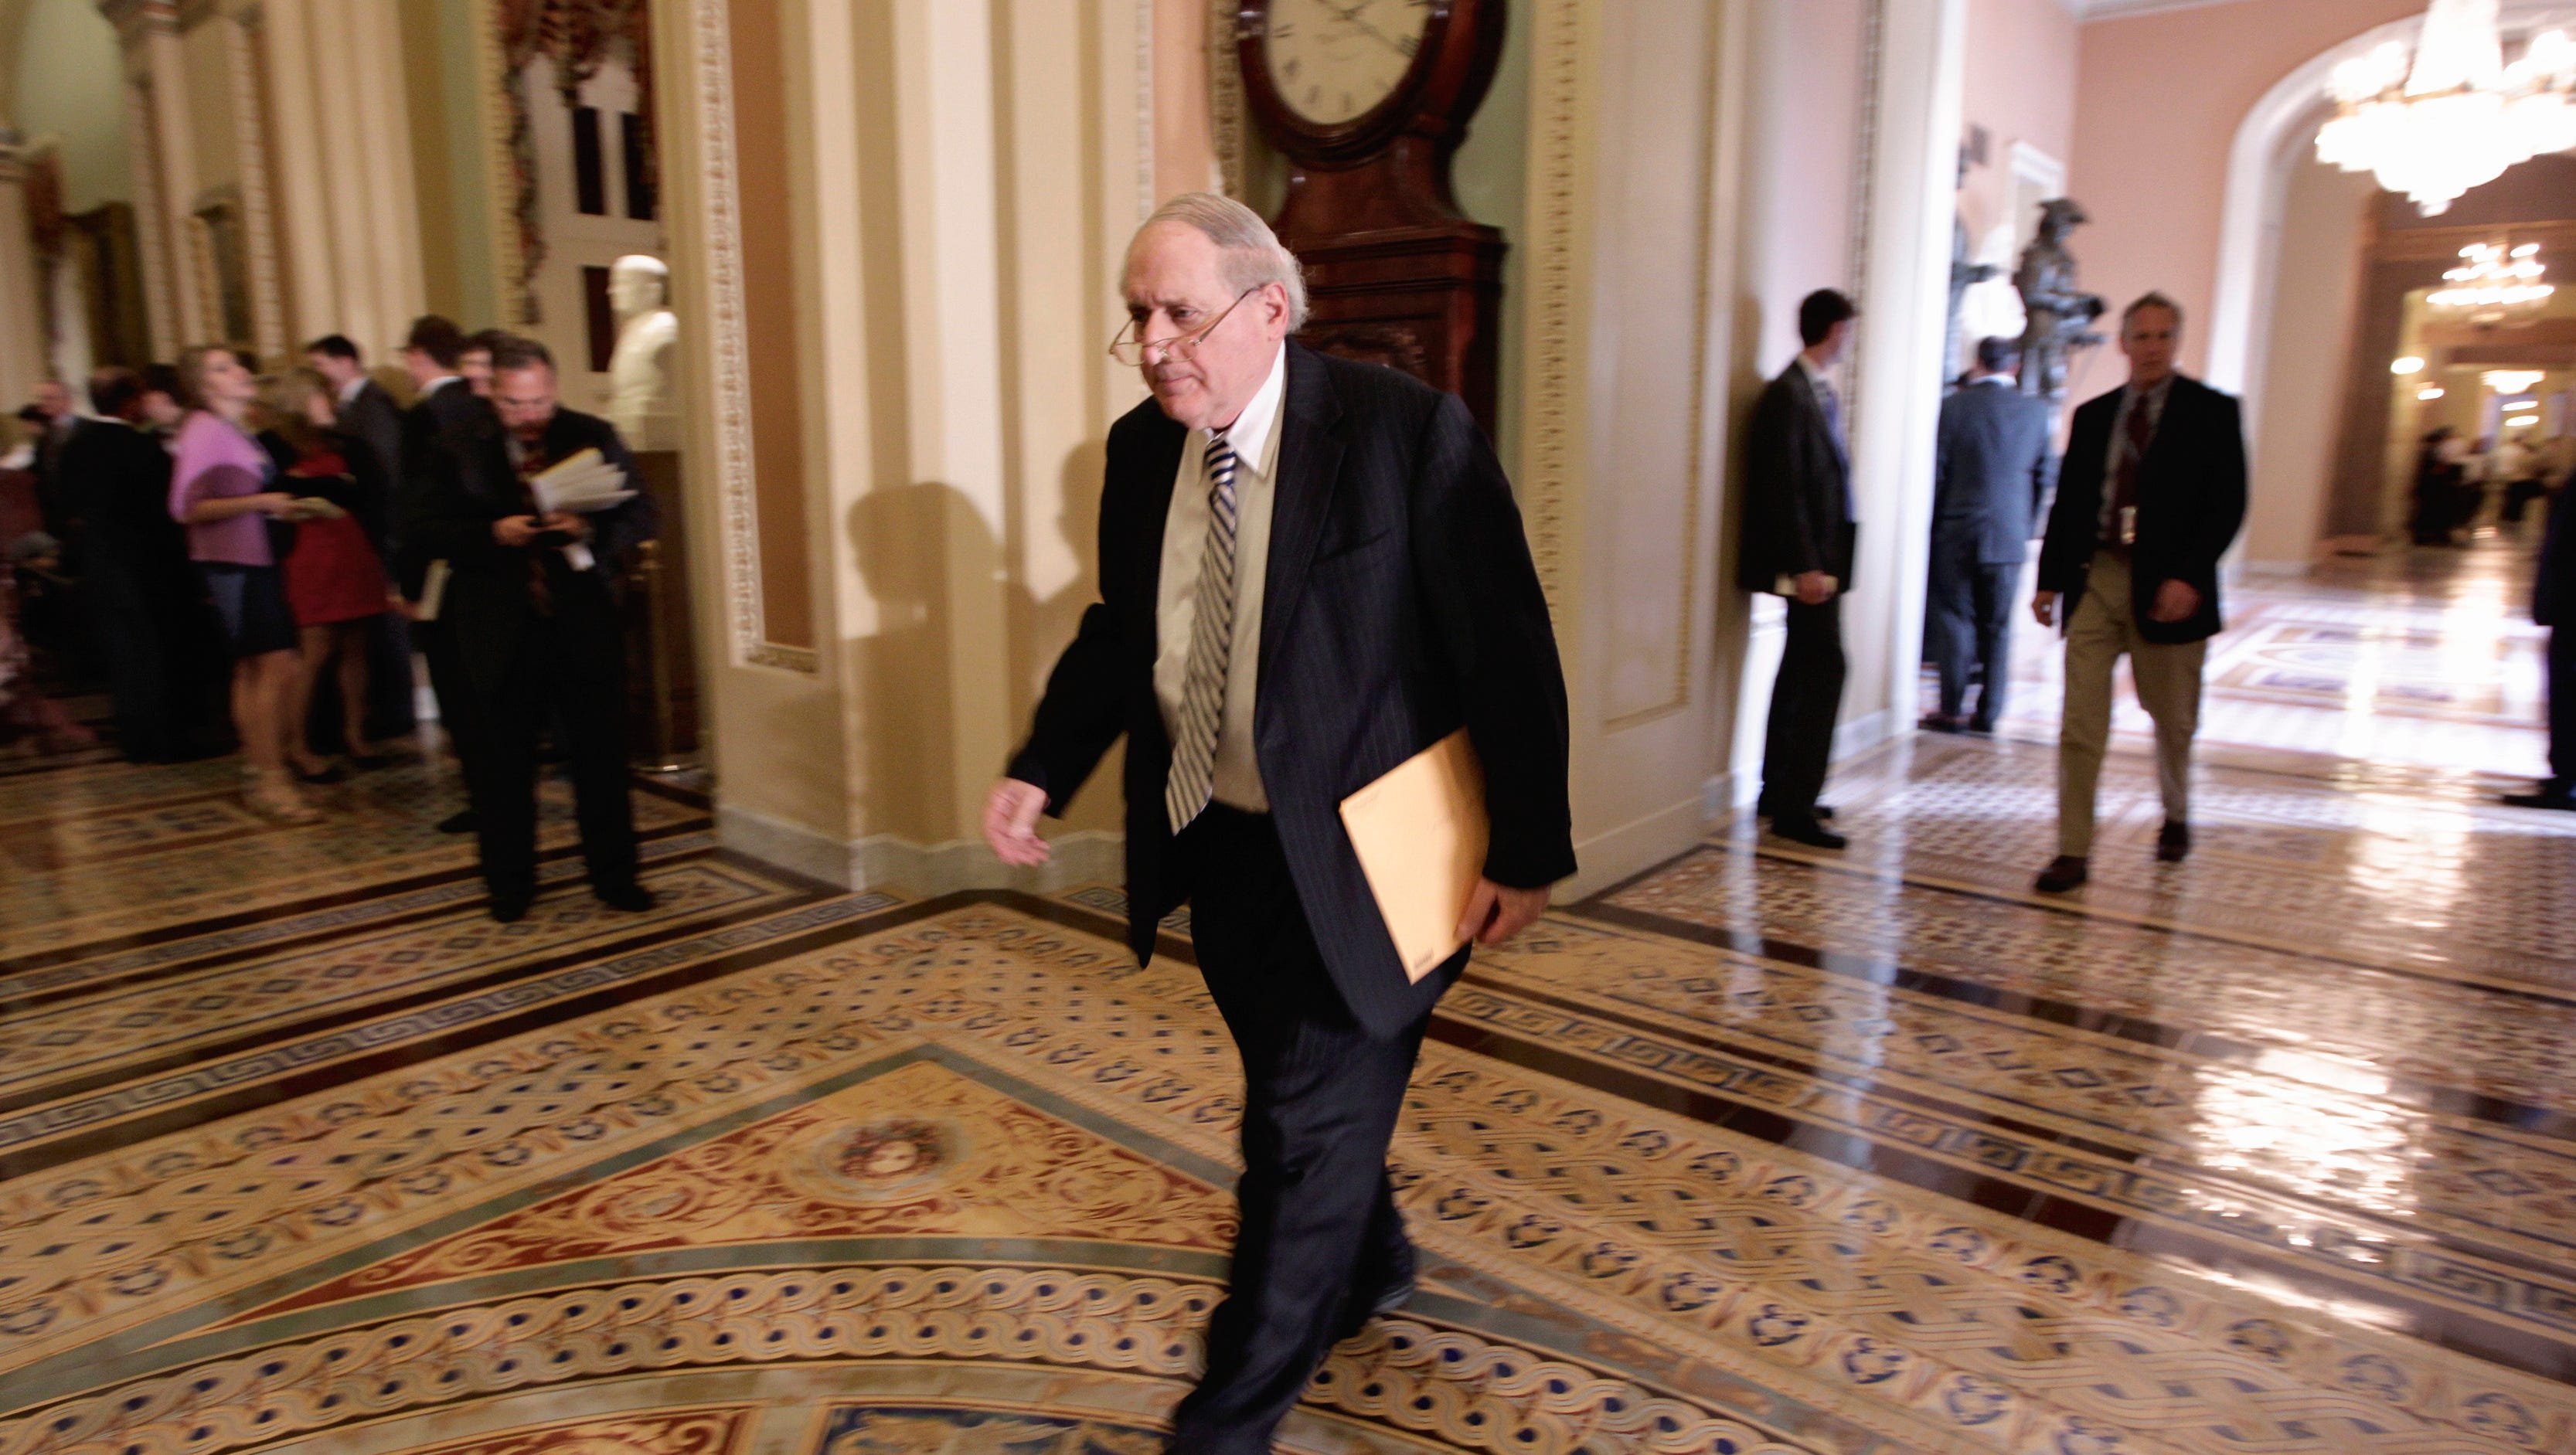 Sen. Carl Levin's departure, along with the retirements of U.S. Reps. John Dingell of Dearborn, Mike Rogers of Howell and Dave Camp of Midland, means the state is losing influence in the nation’s capital.